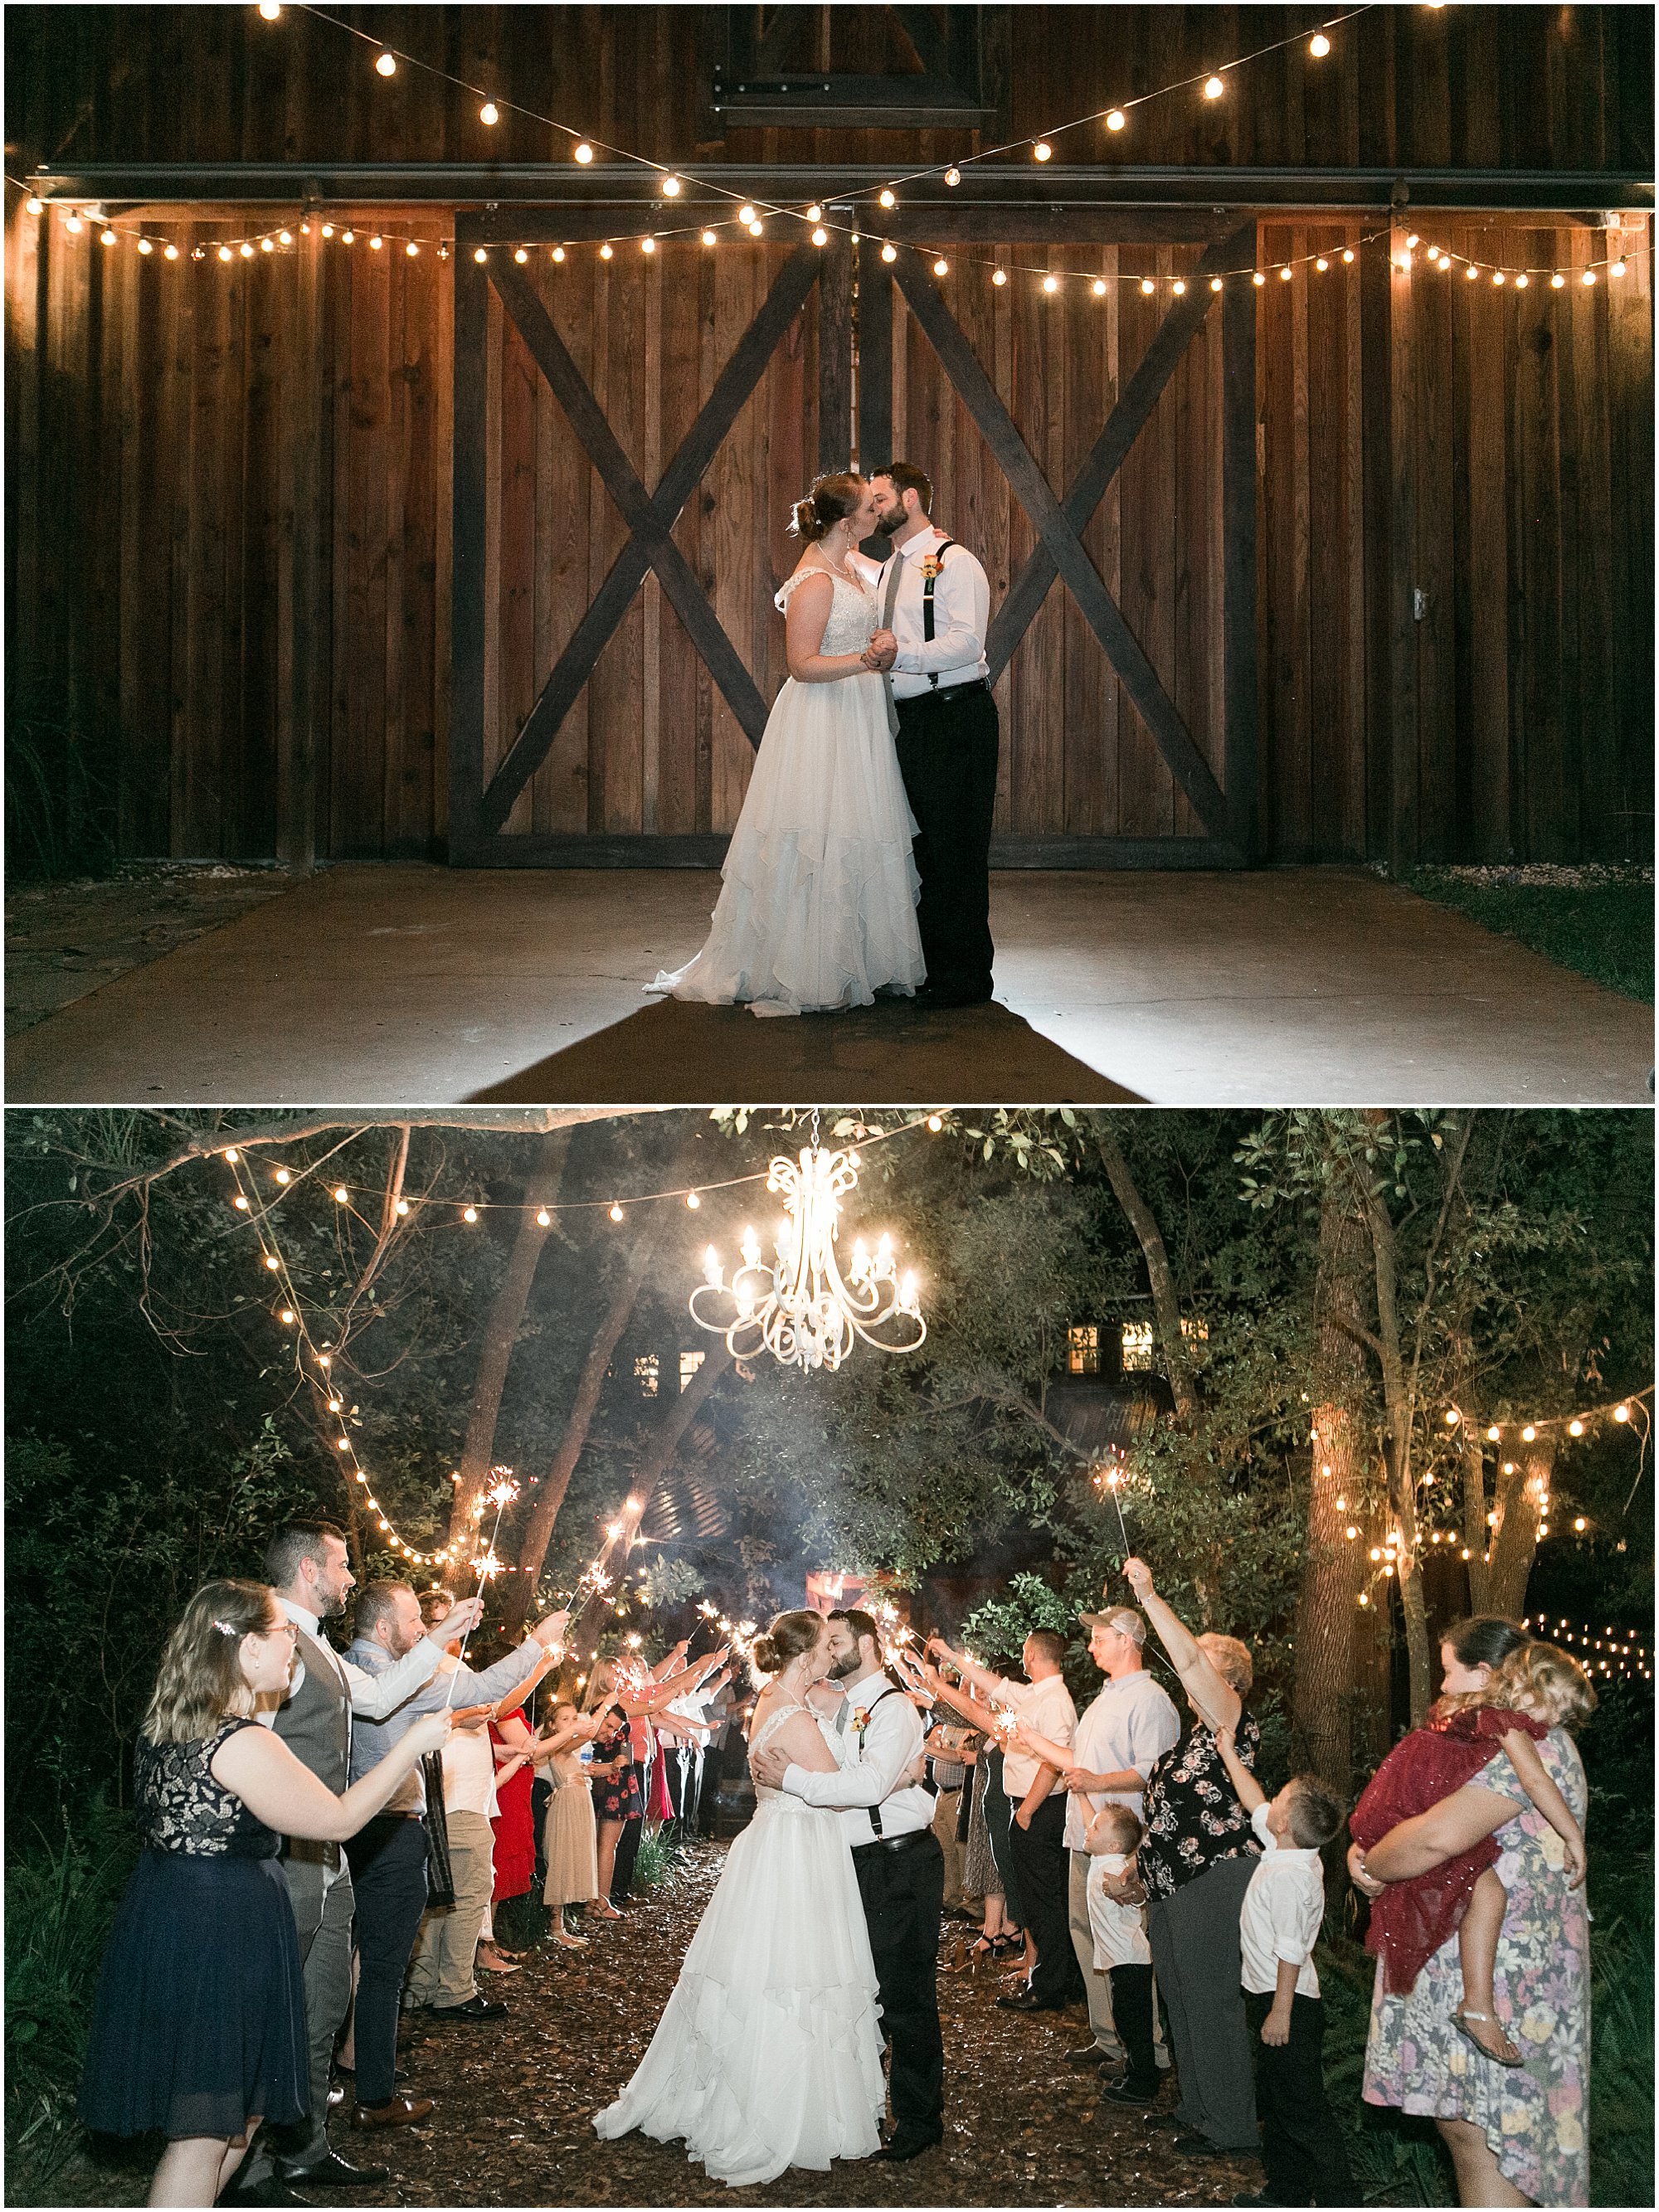 Enchanted forest wedding comes to an end at the bride and groom run through a tunnel of sparklers